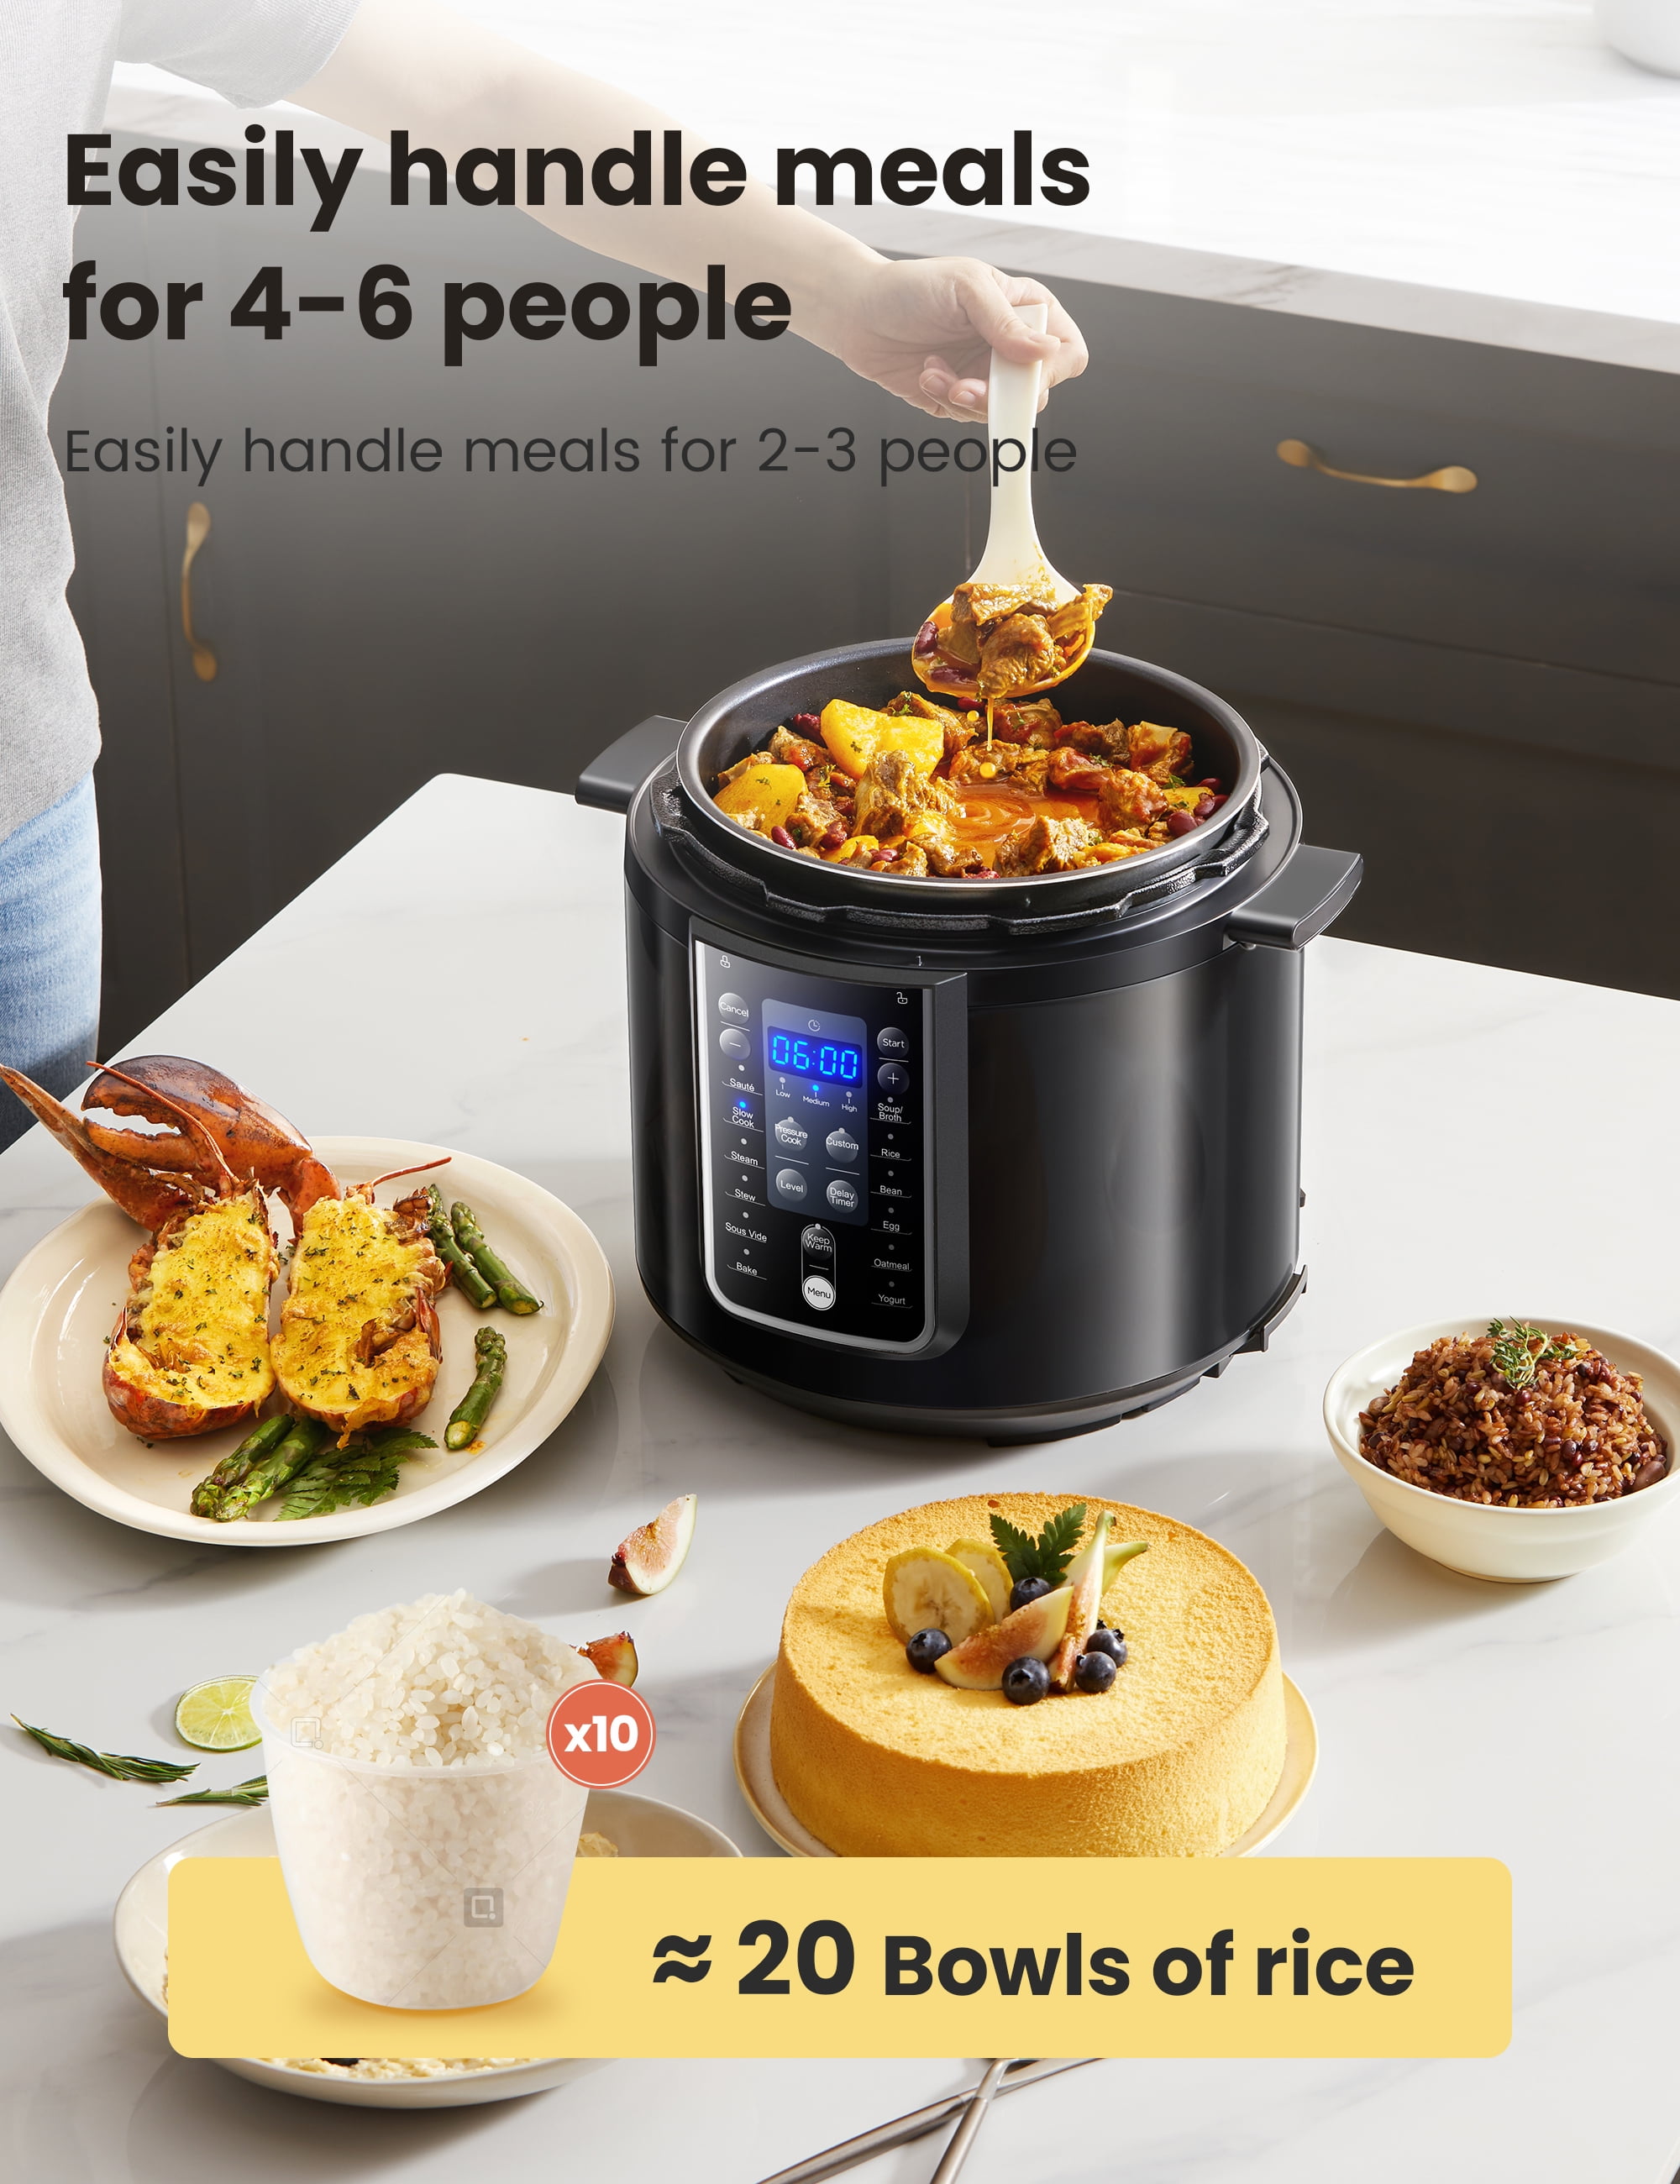 6QT 3-in-1 Slow Cooker, Pressure Cooker, and Sauté Pot Coffee